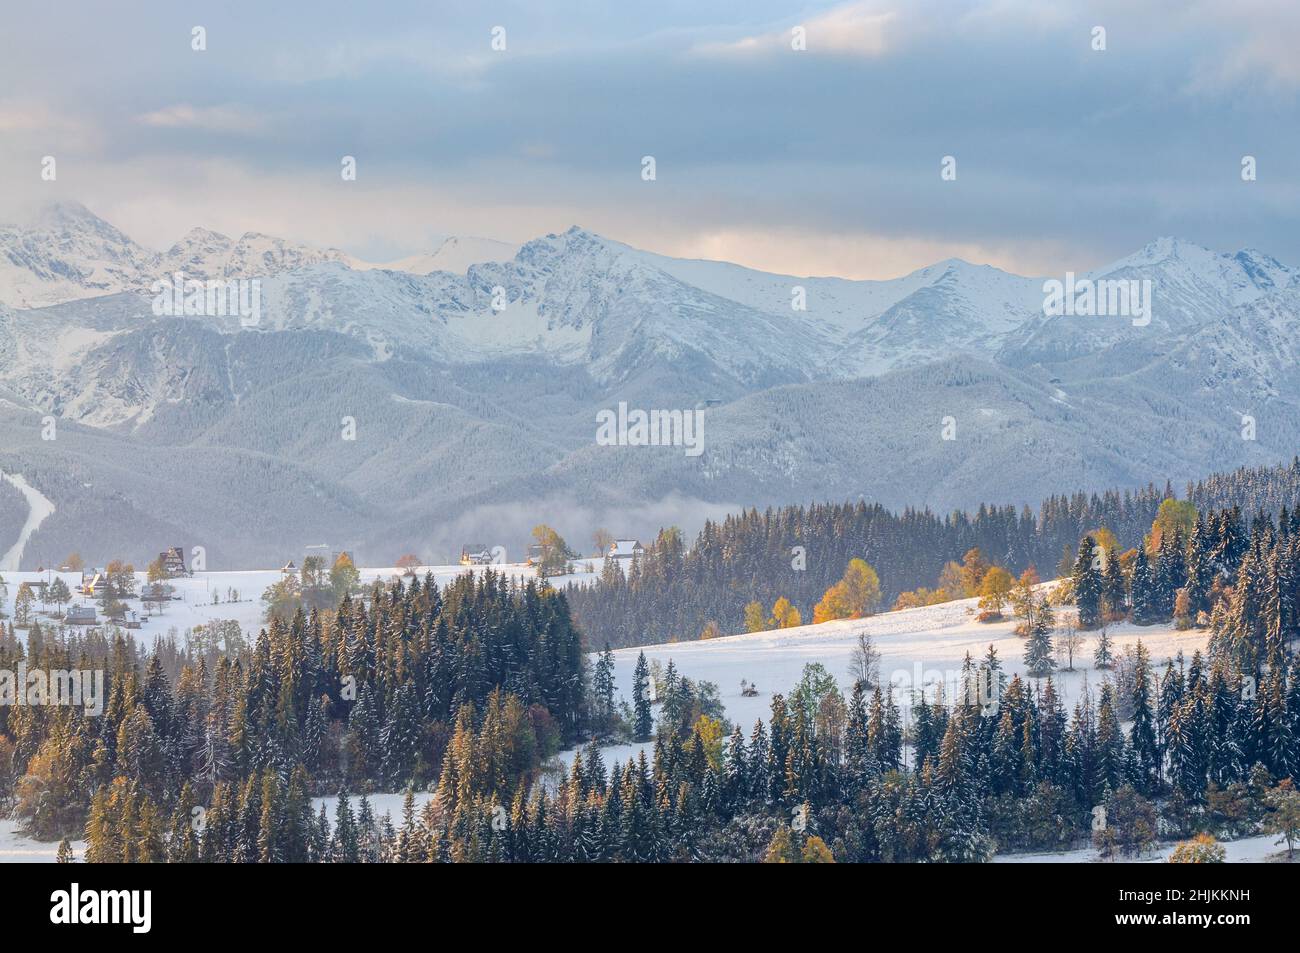 The first snow in Podhale. In the background snowy peaks of the Tatra Mountains (Swinica, Kasprowy Wierch and the Western Tatras). Stock Photo